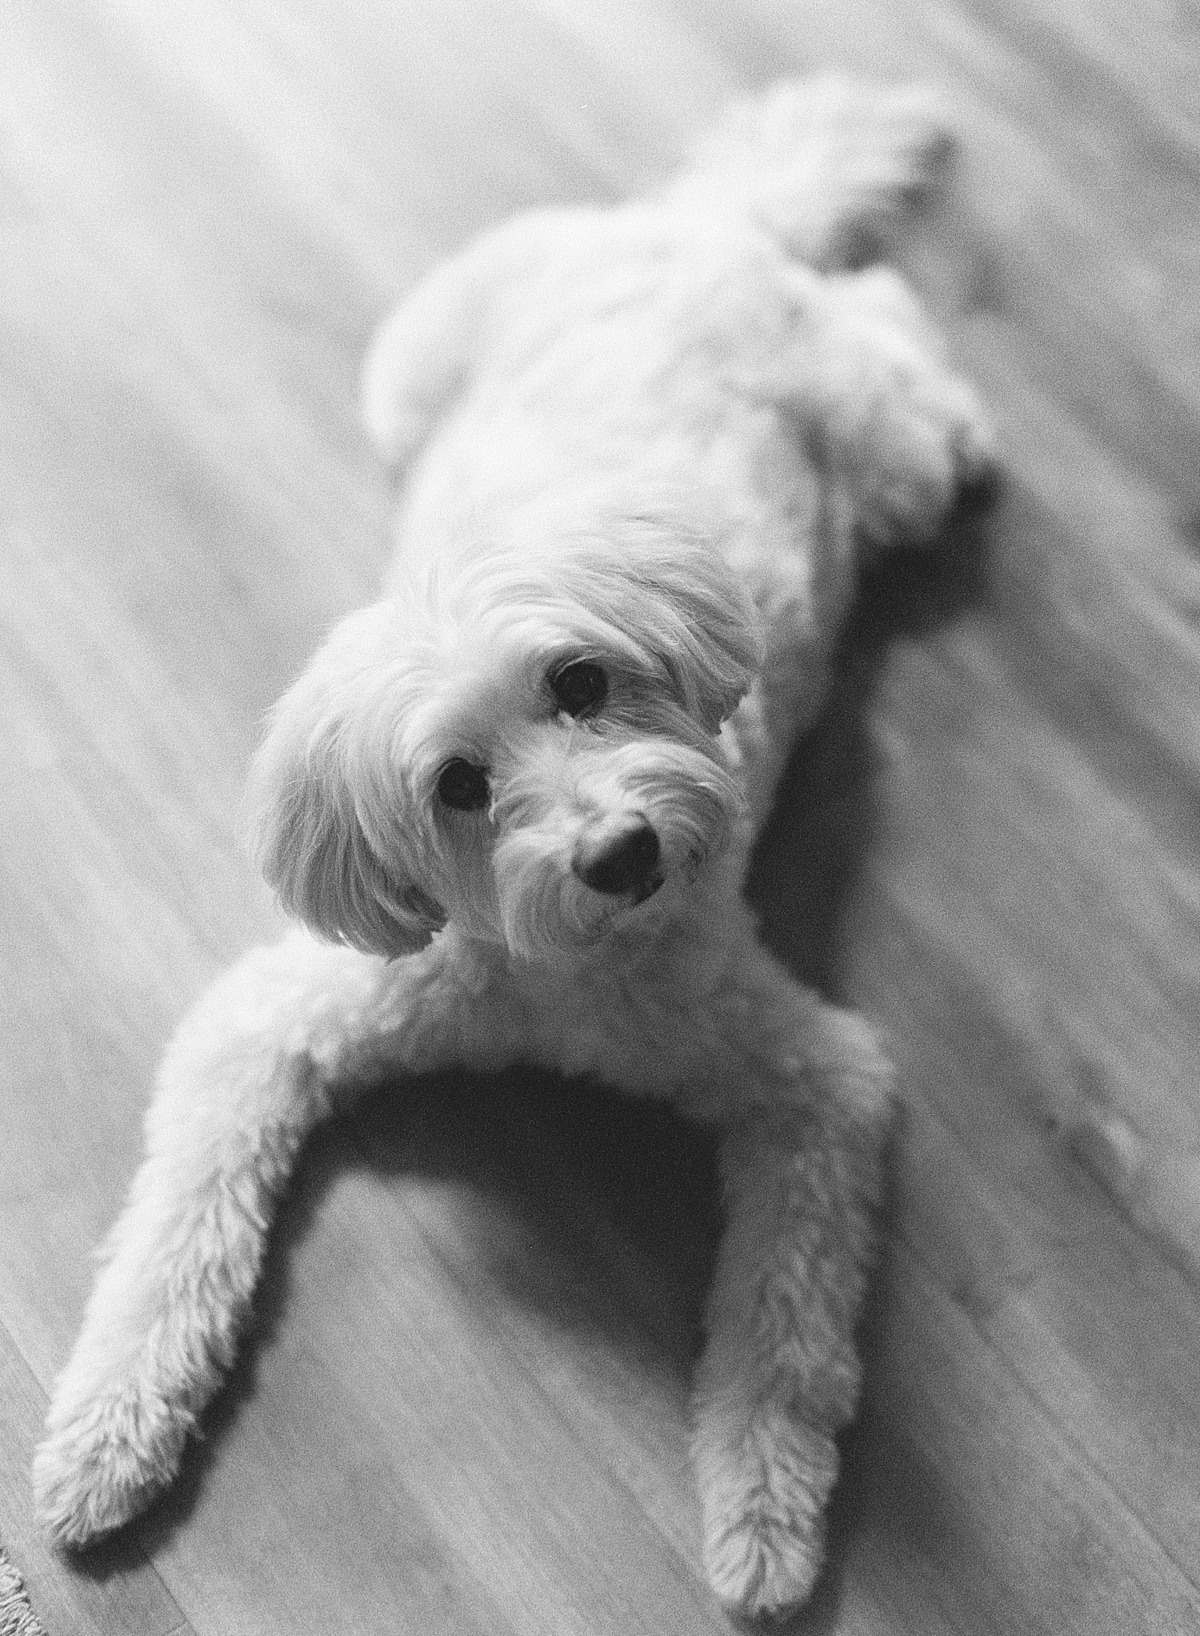 A small fluffy dog looks at the camera on black and white film